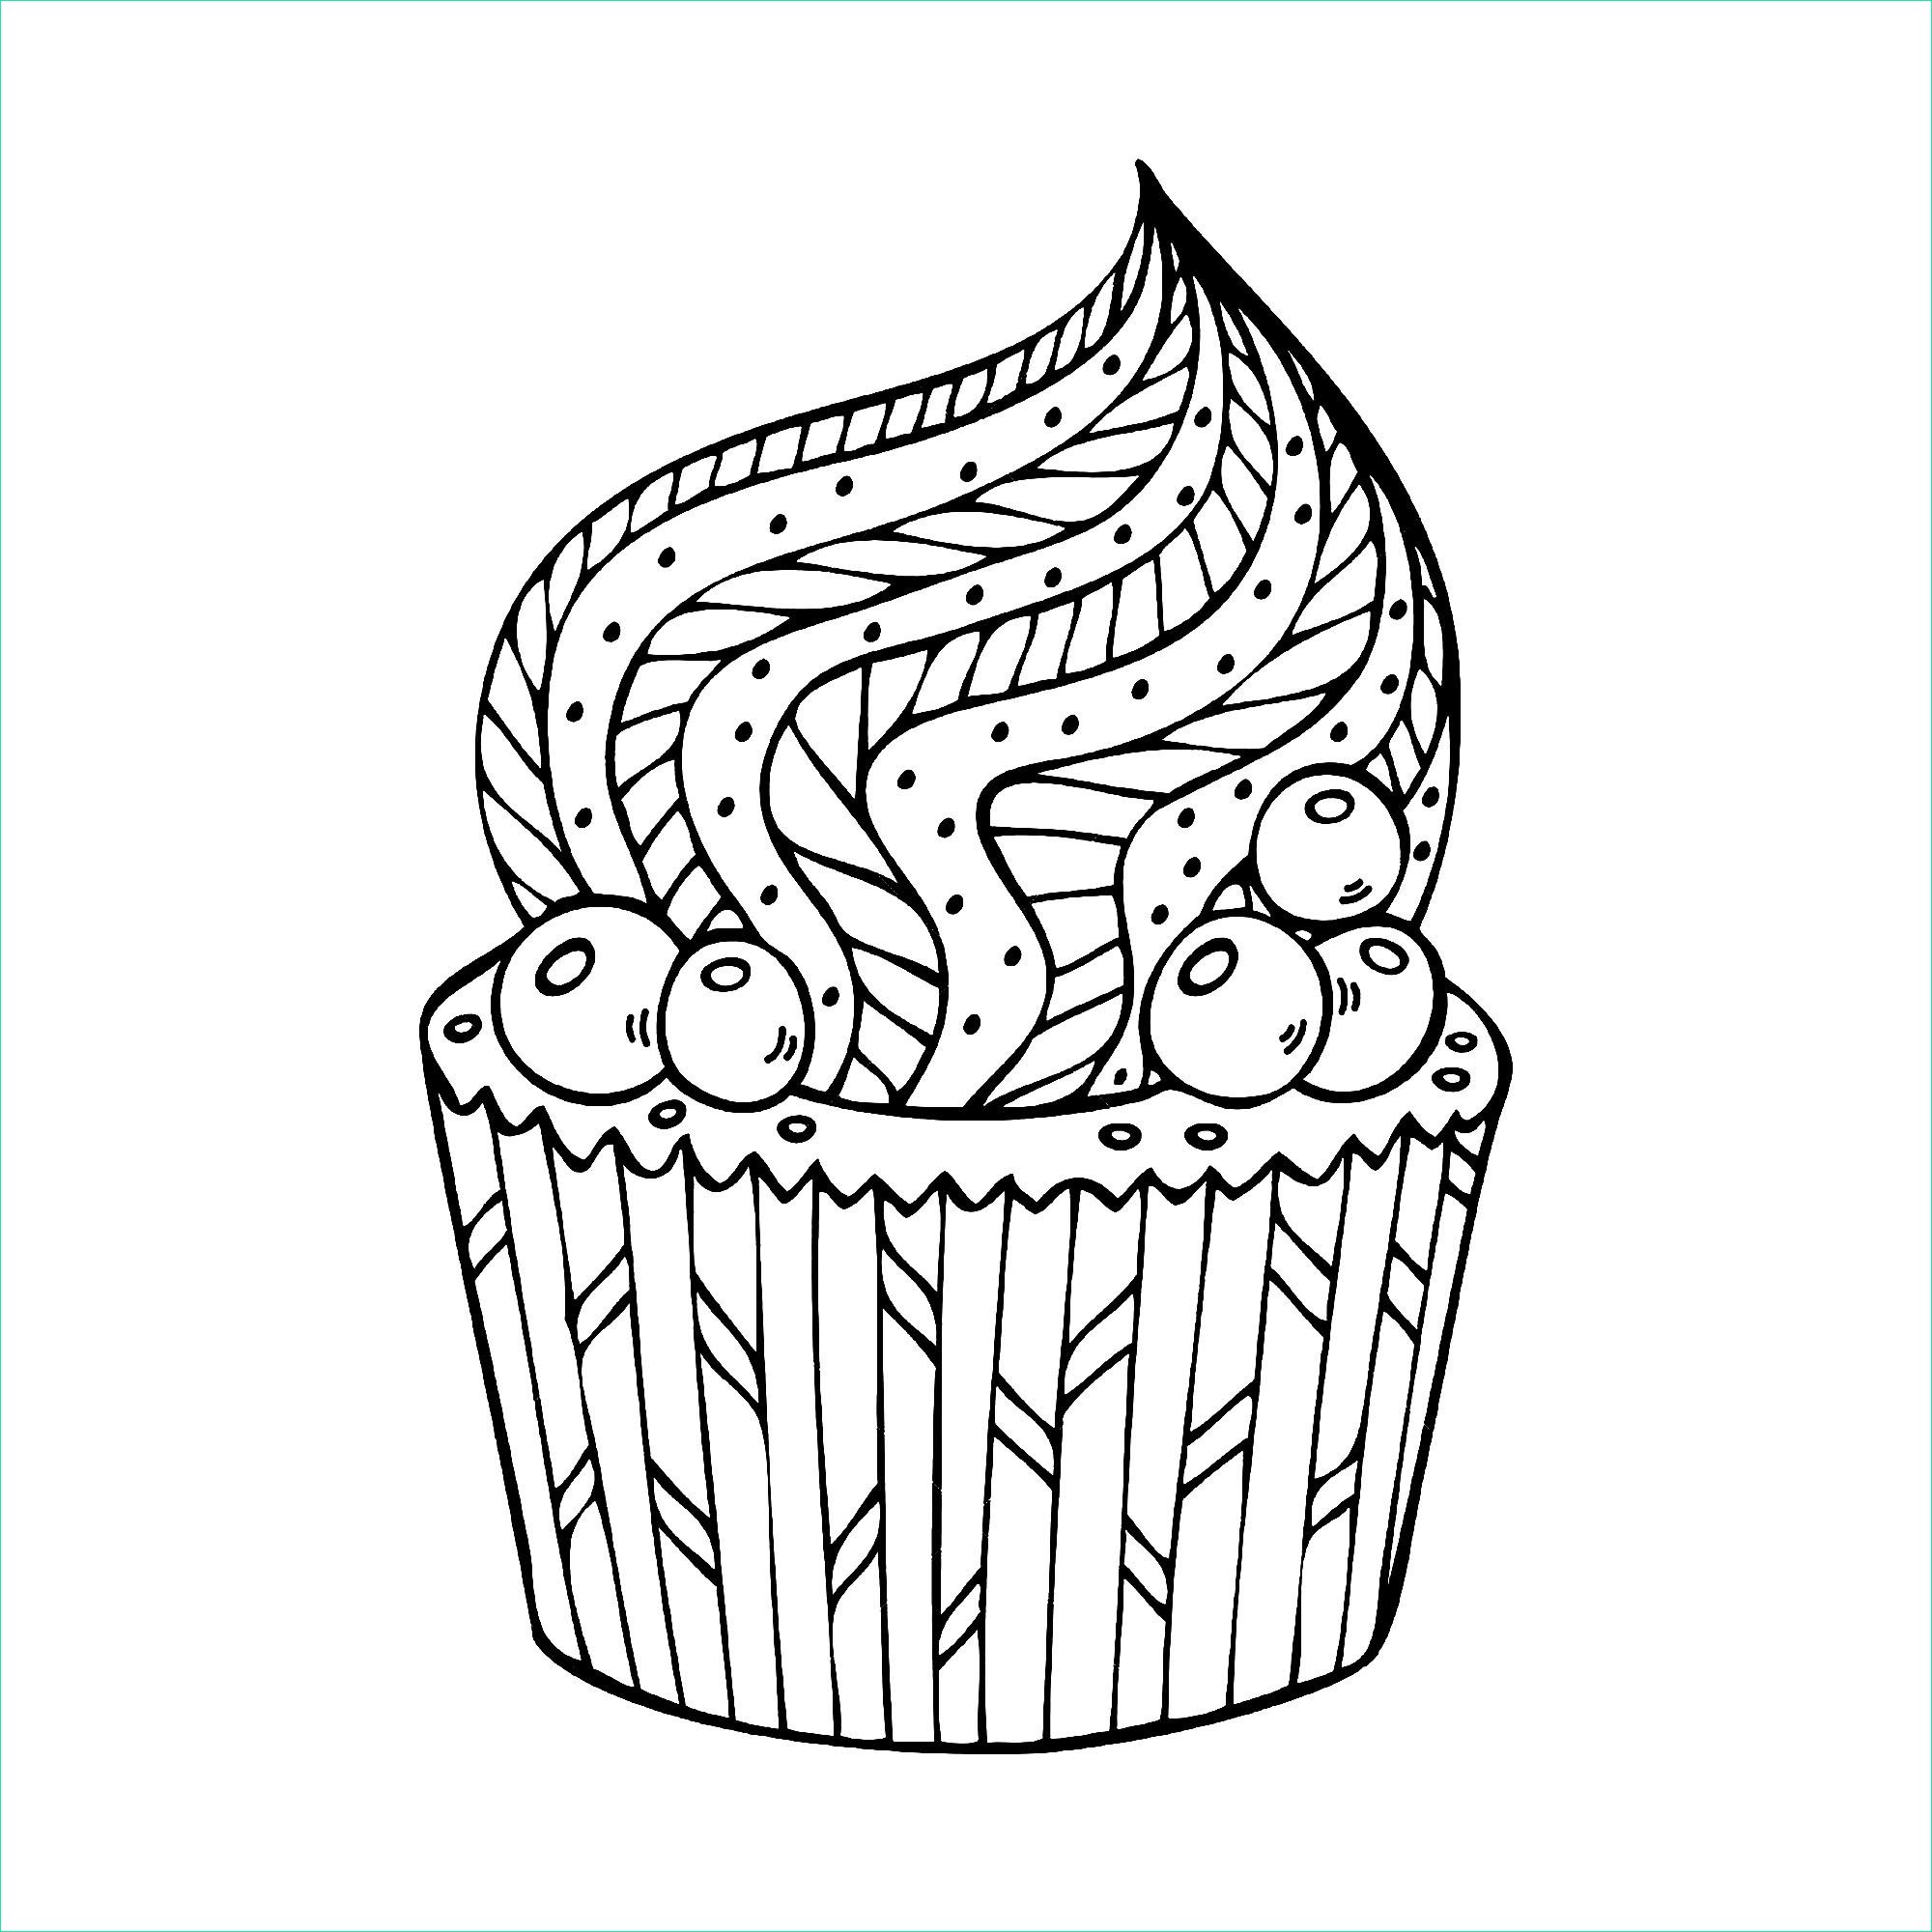 Coloriage Cup Cake Beau Photographie Simple Cupcake à Colorier Coloriage Cupcakes Et Gateaux